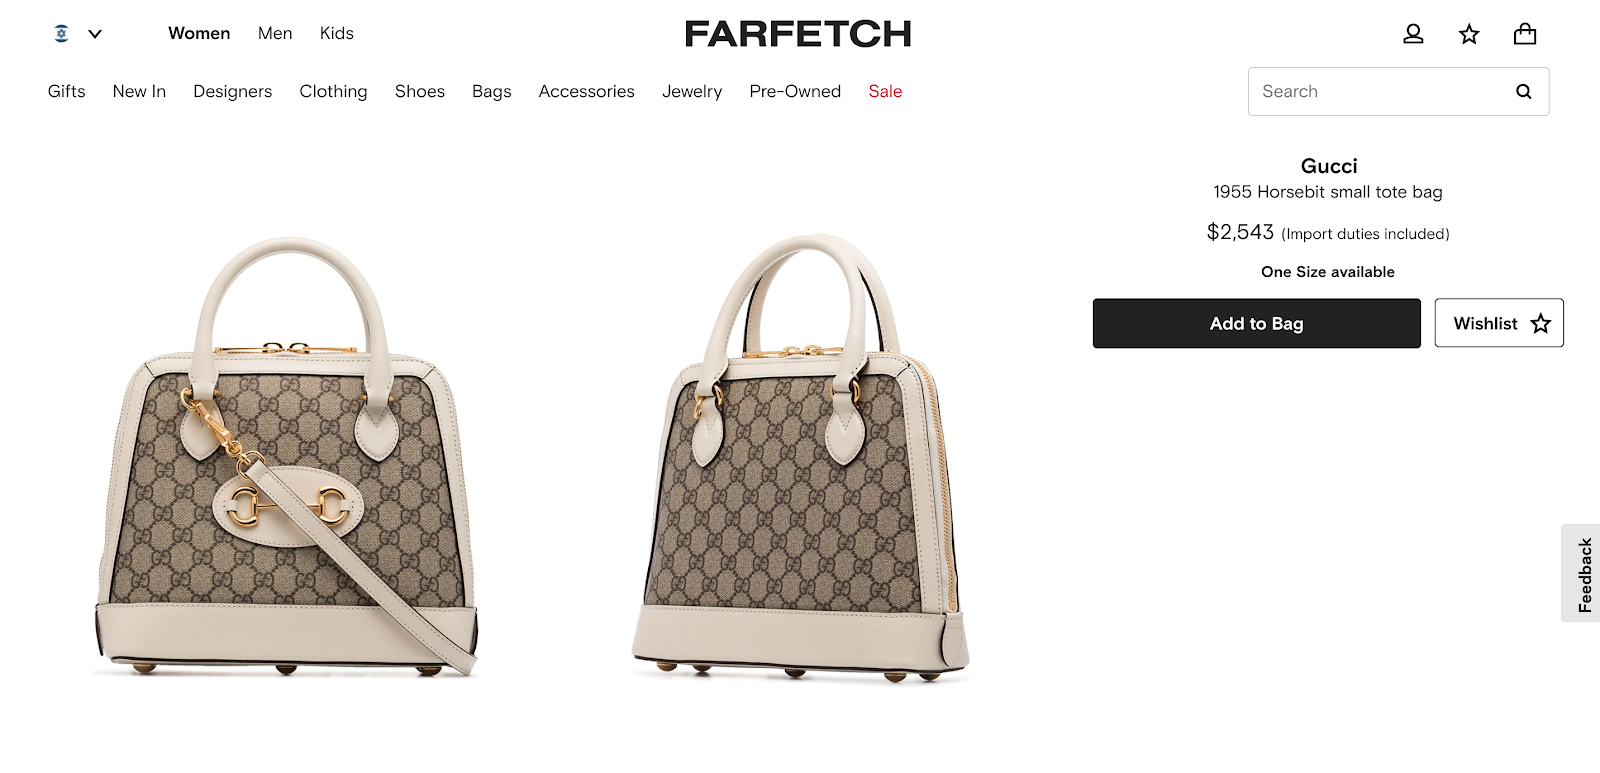 Farfetch product detail page example